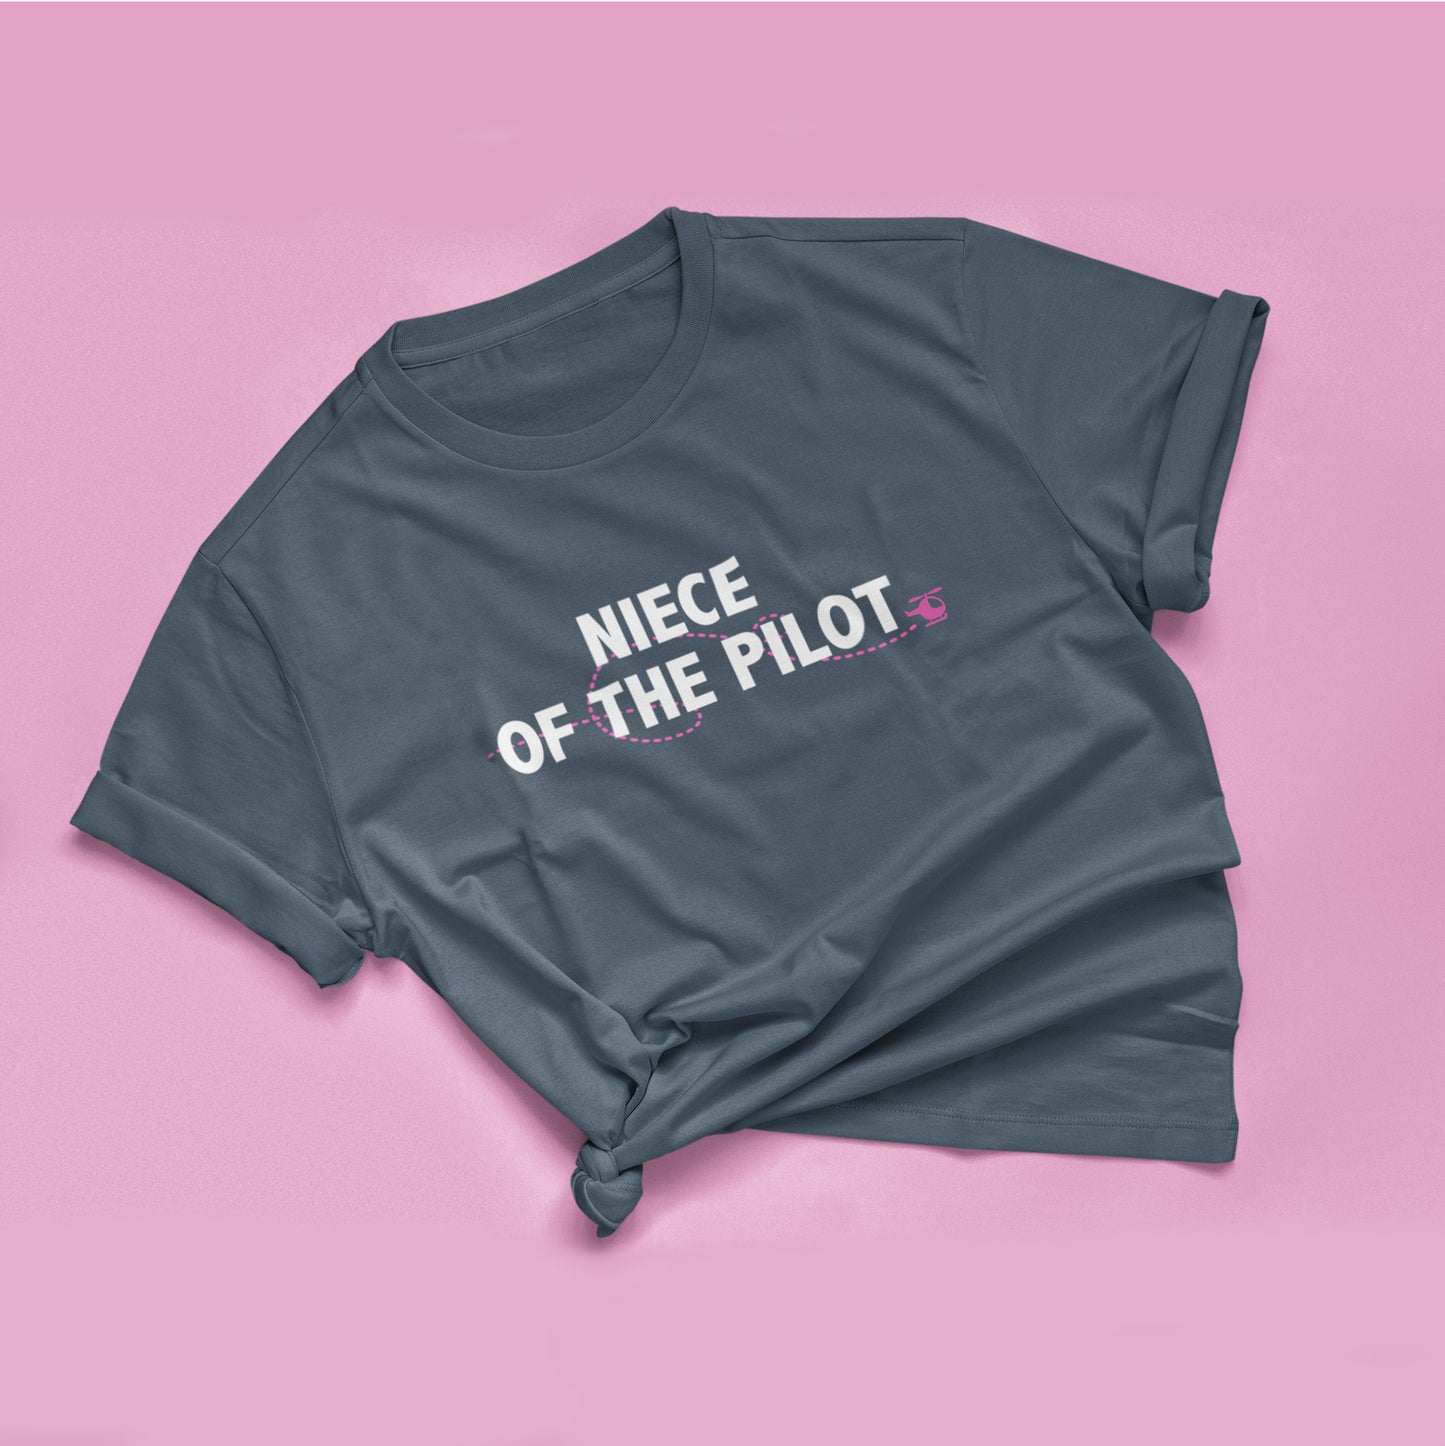 Niece of the/a Pilot - Baby & Toddler T-shirts